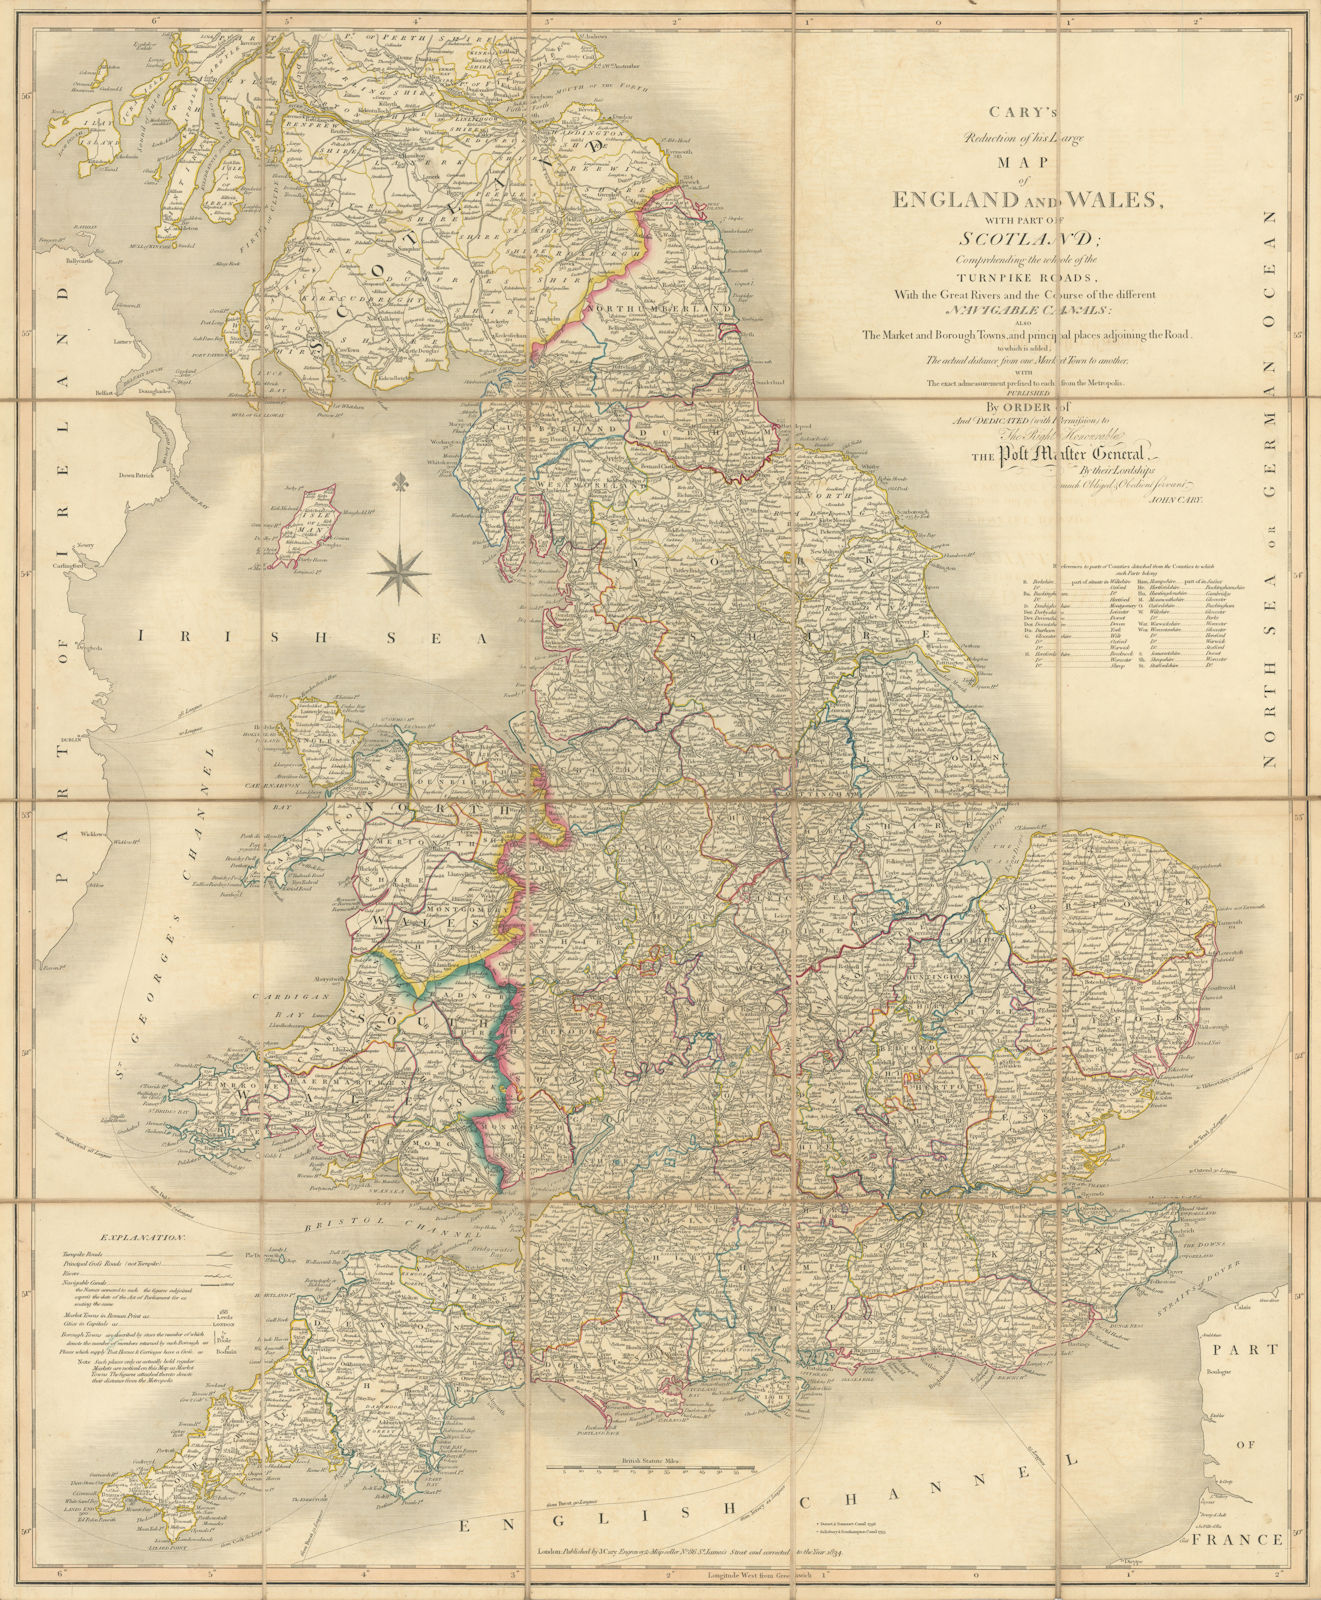 'Cary's reduction of his large map of England & Wales'. Turnpikes canals &c 1834